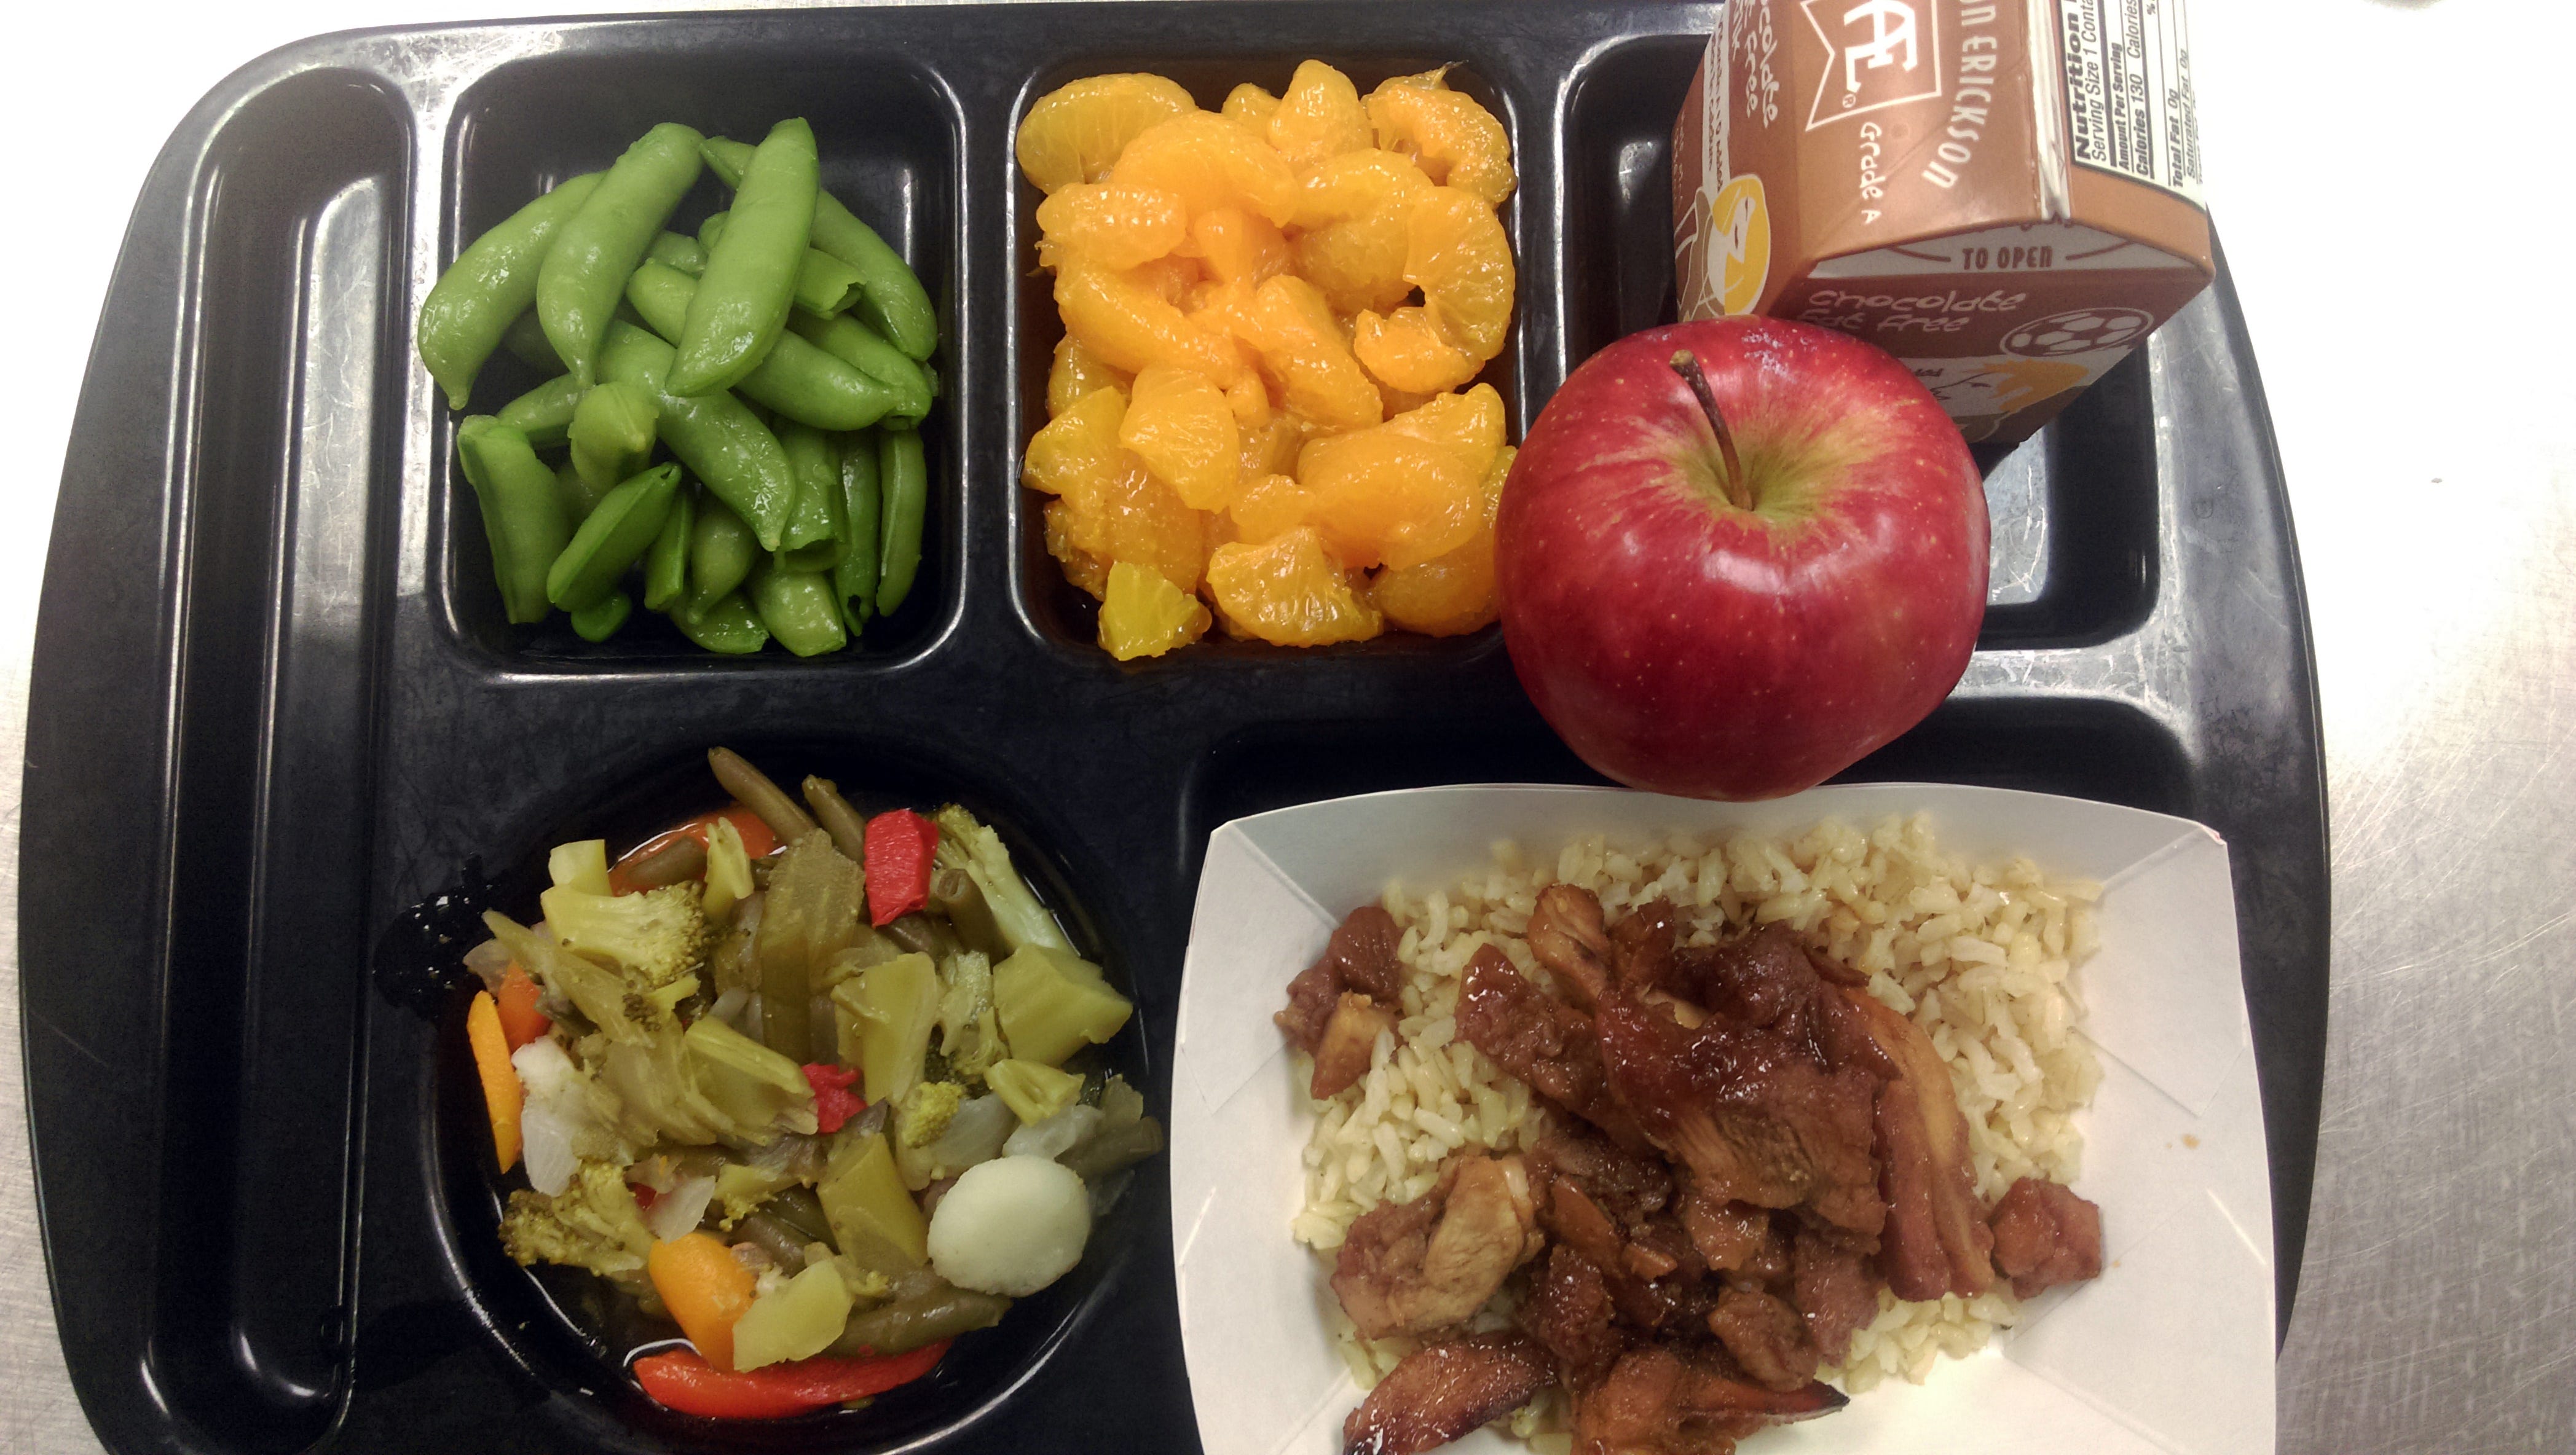 School lunches need to support athletes